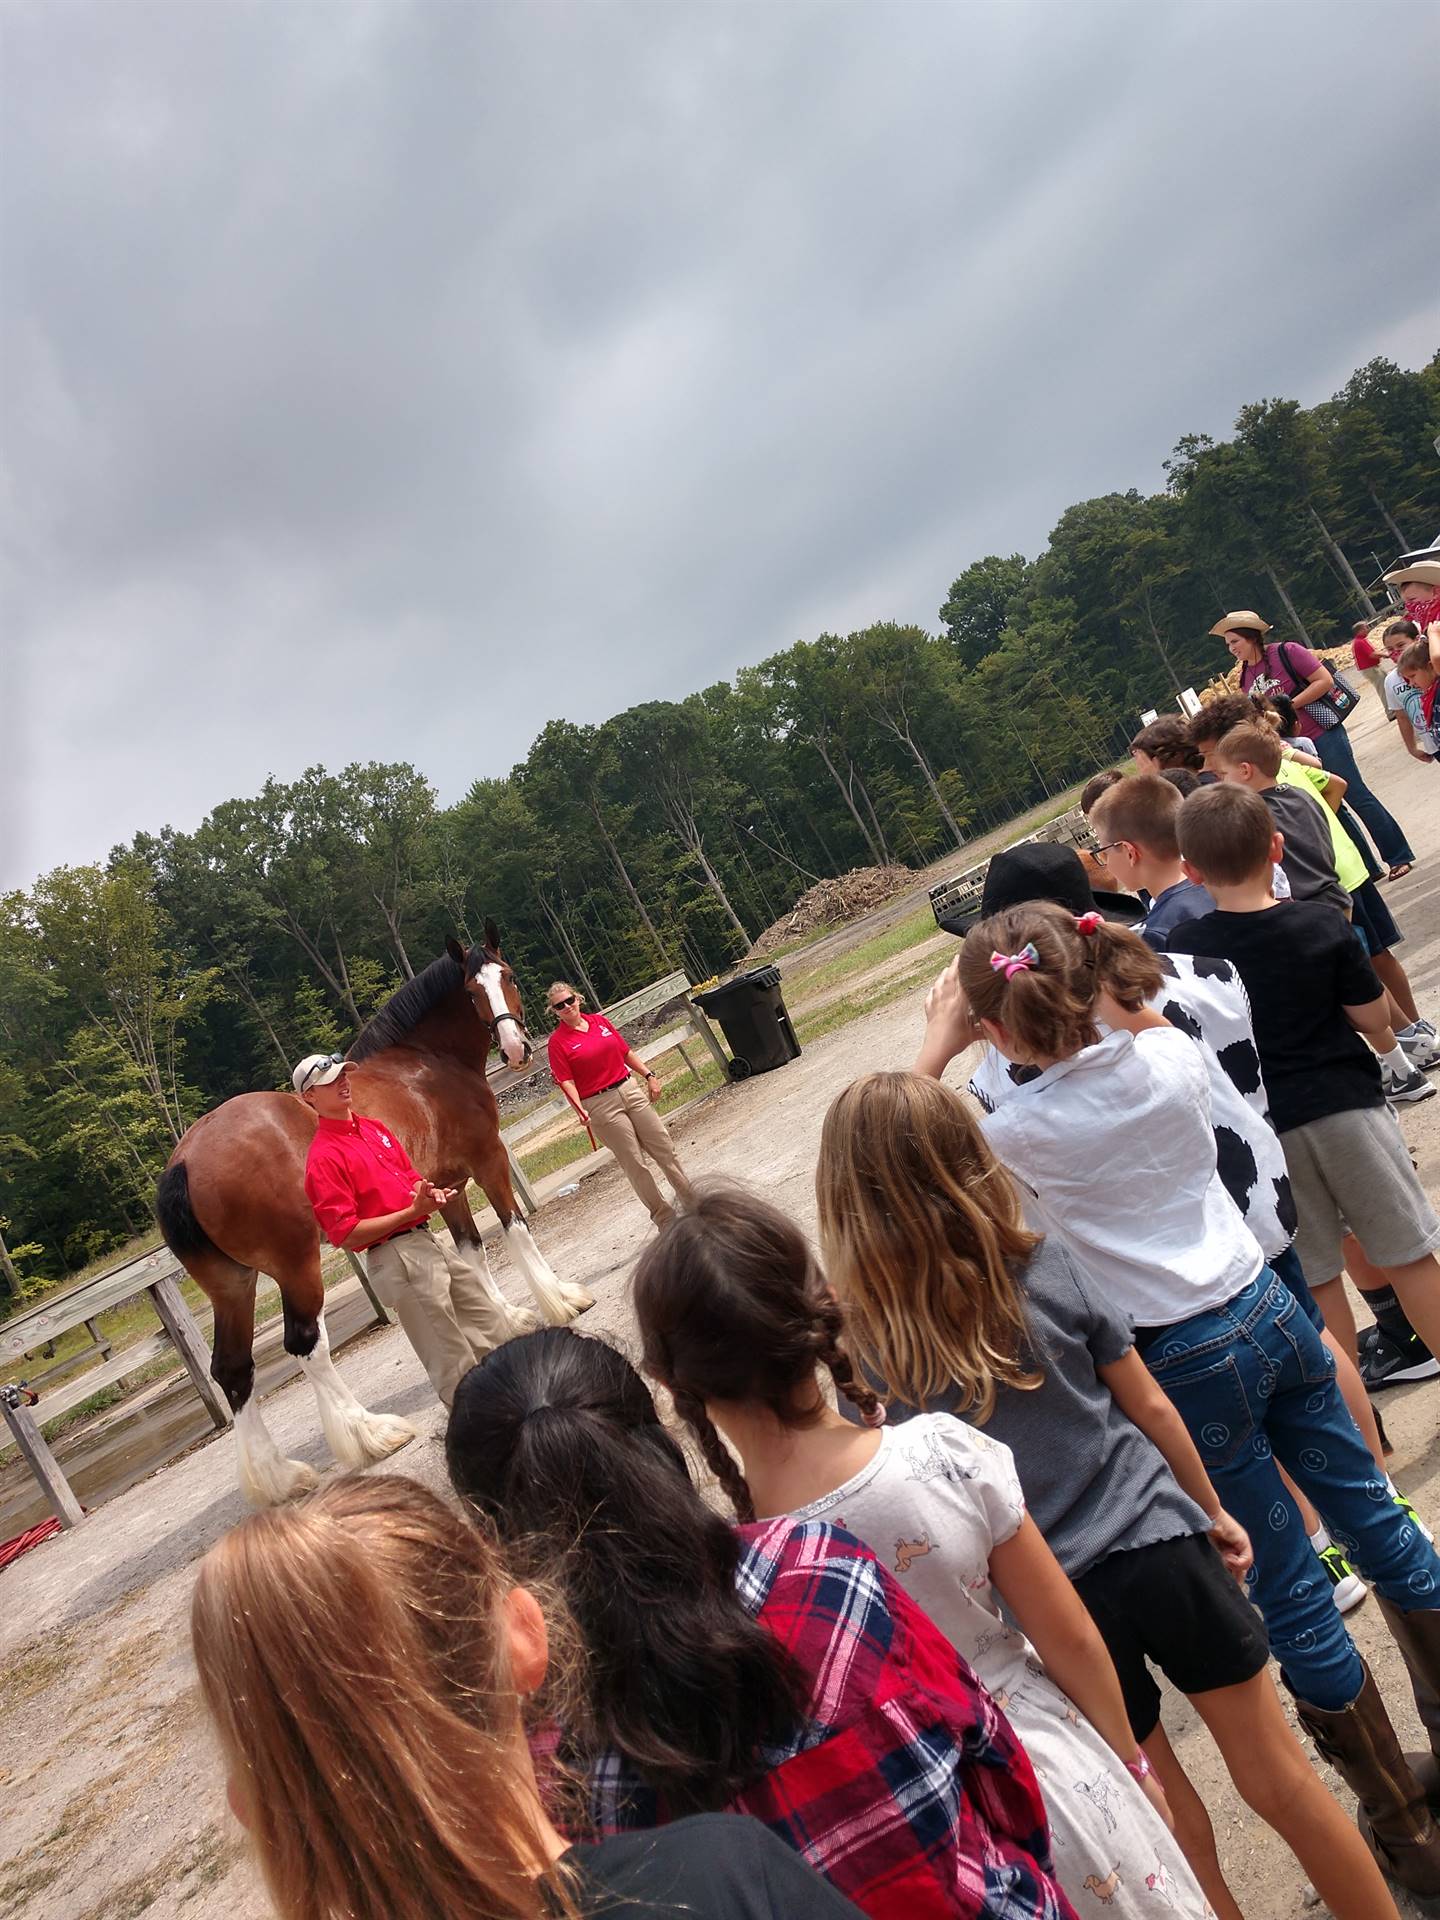 Field trip to see the Clydesdale Horses